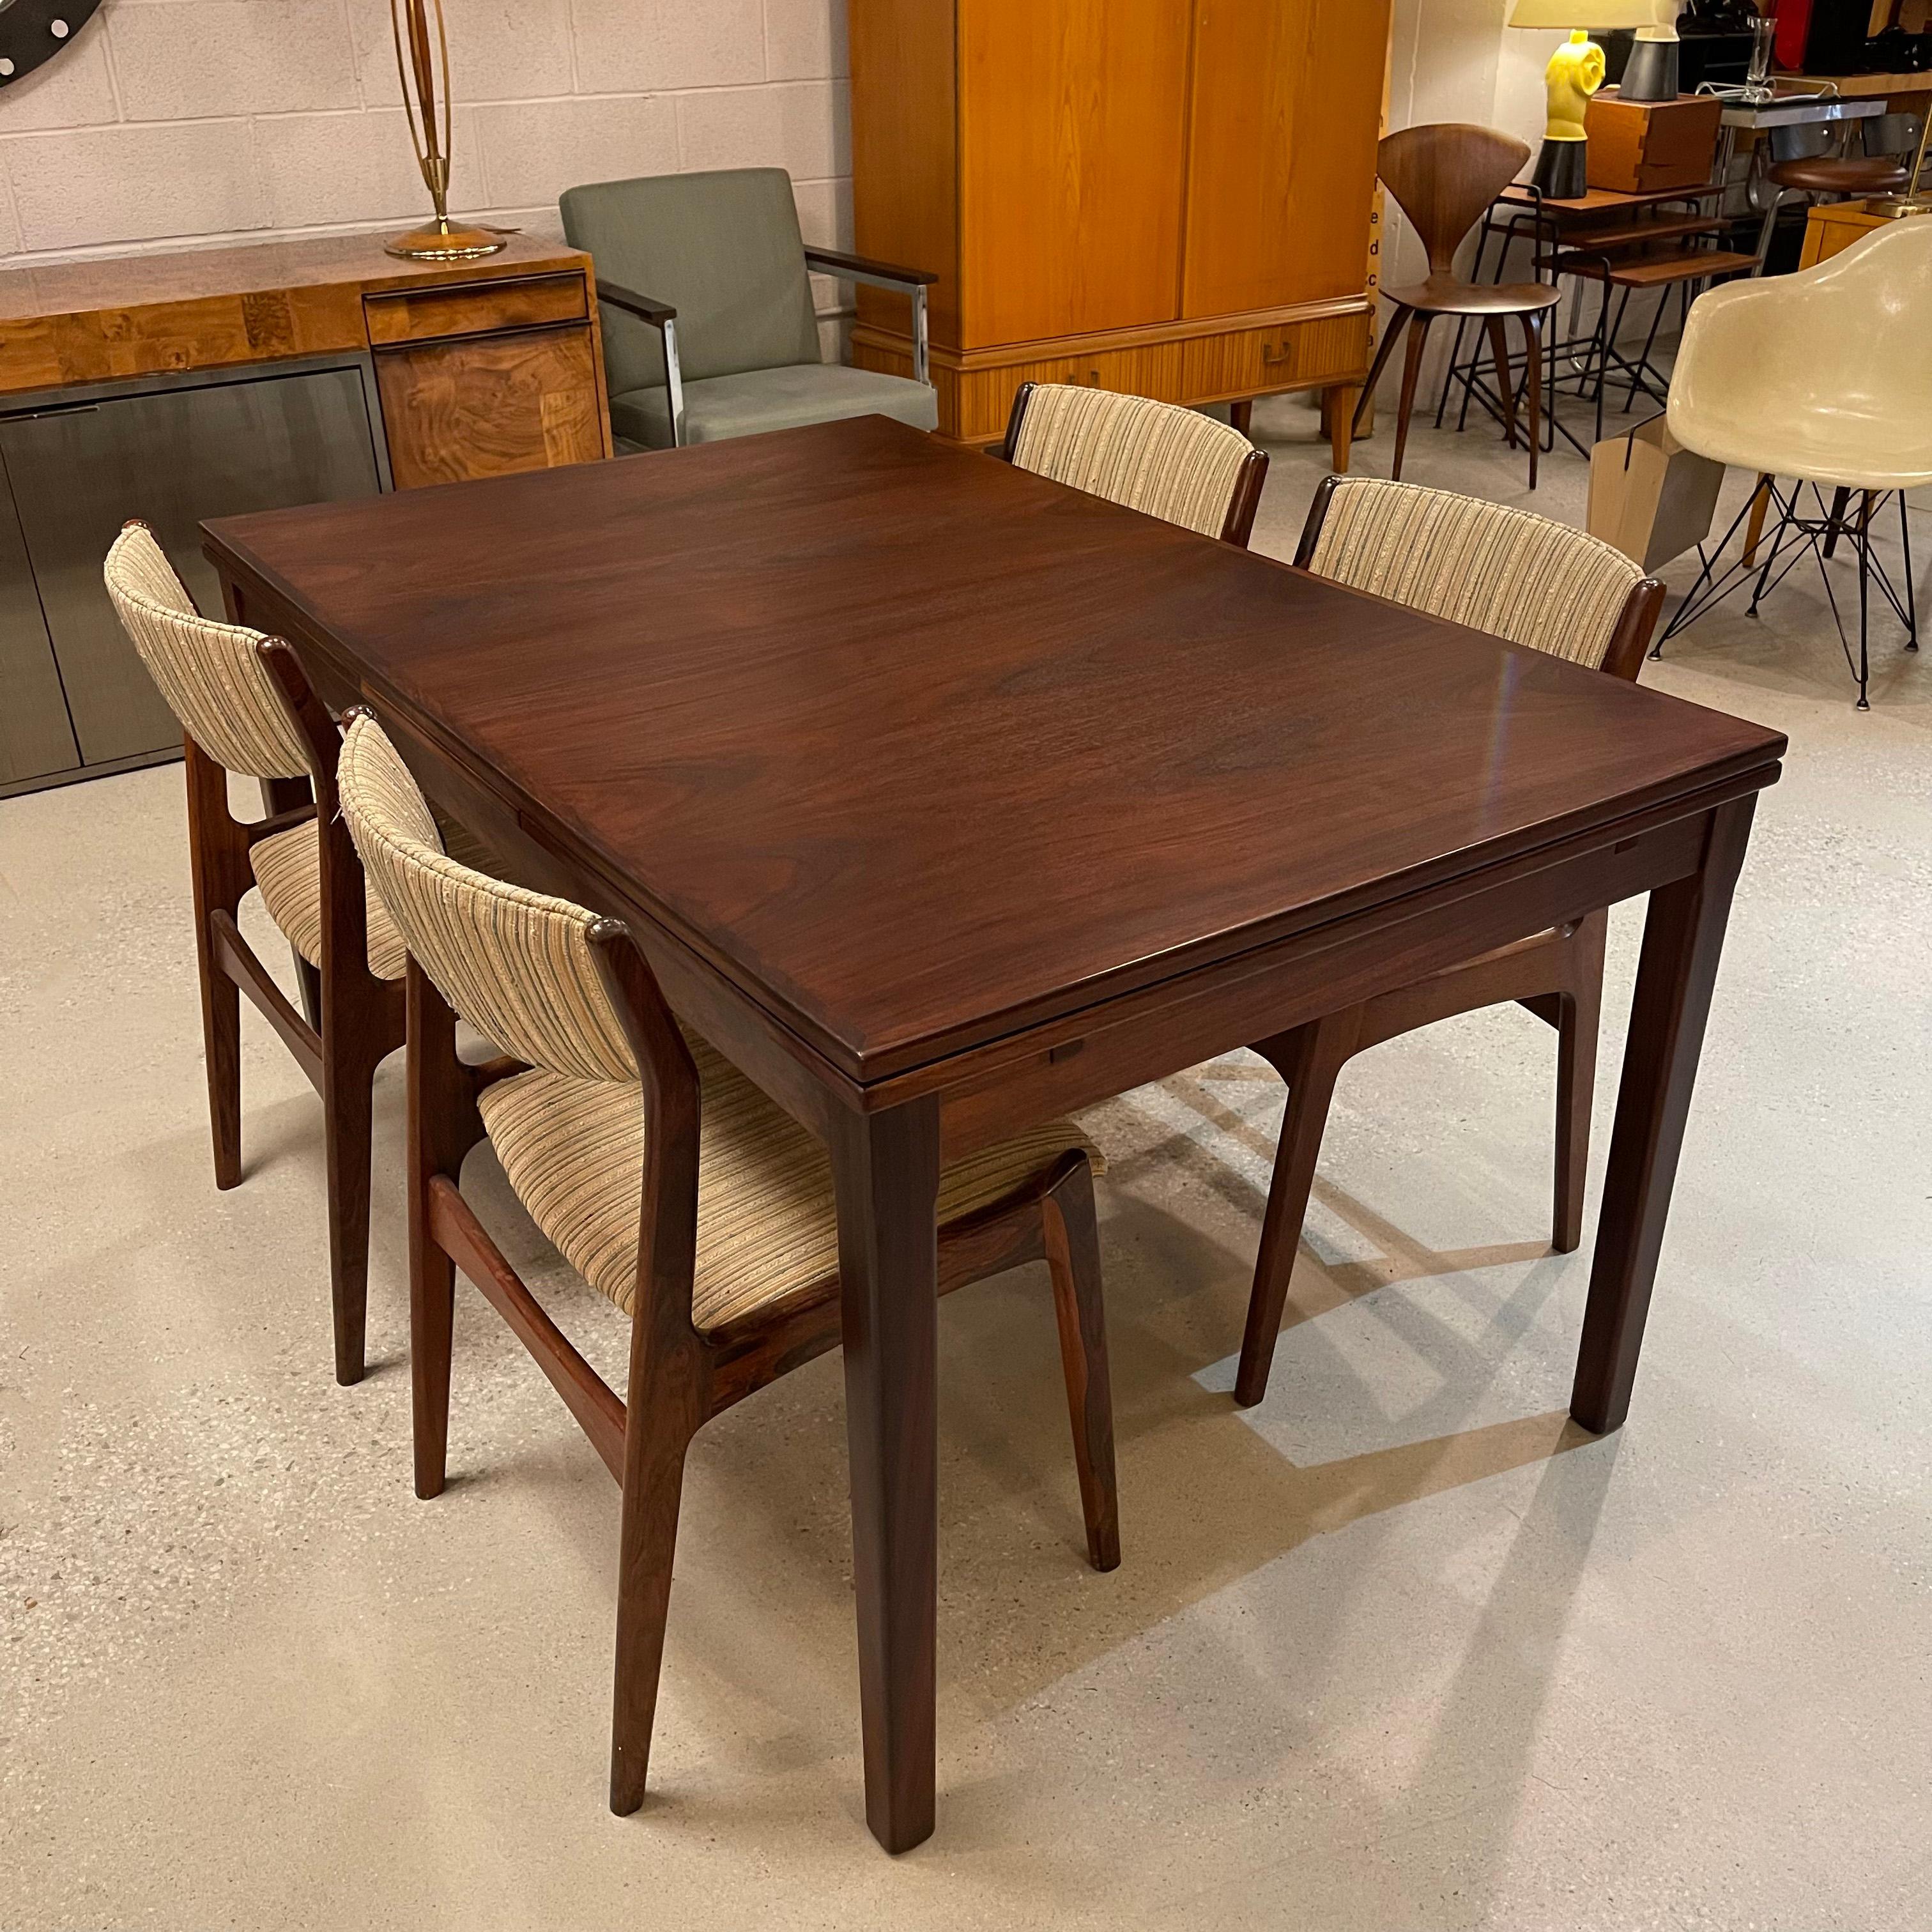 20th Century Scandinavian Modern Rosewood Extension Dining Table